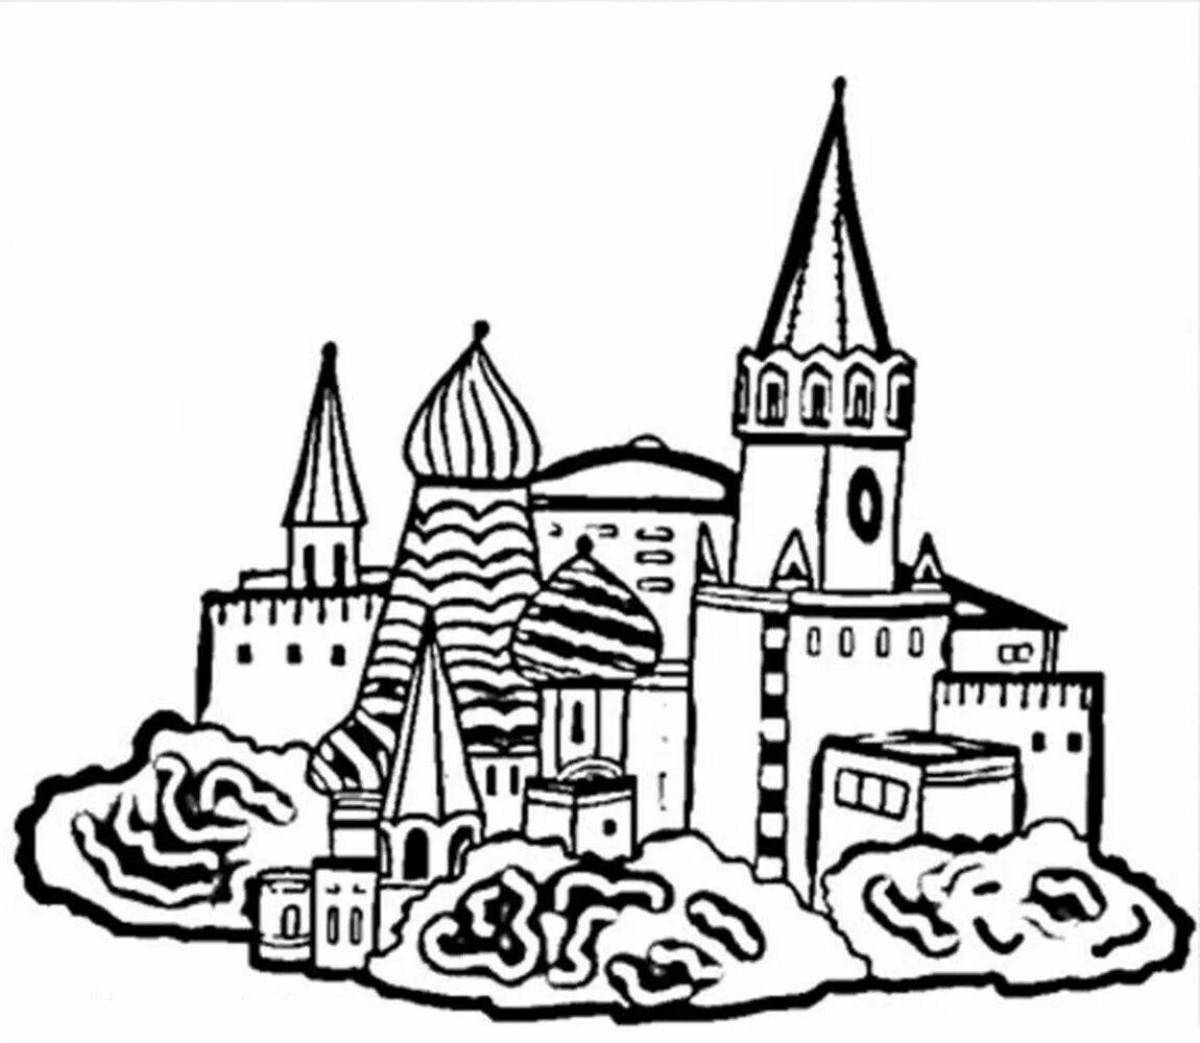 Innovative Moscow Kremlin coloring book for kids